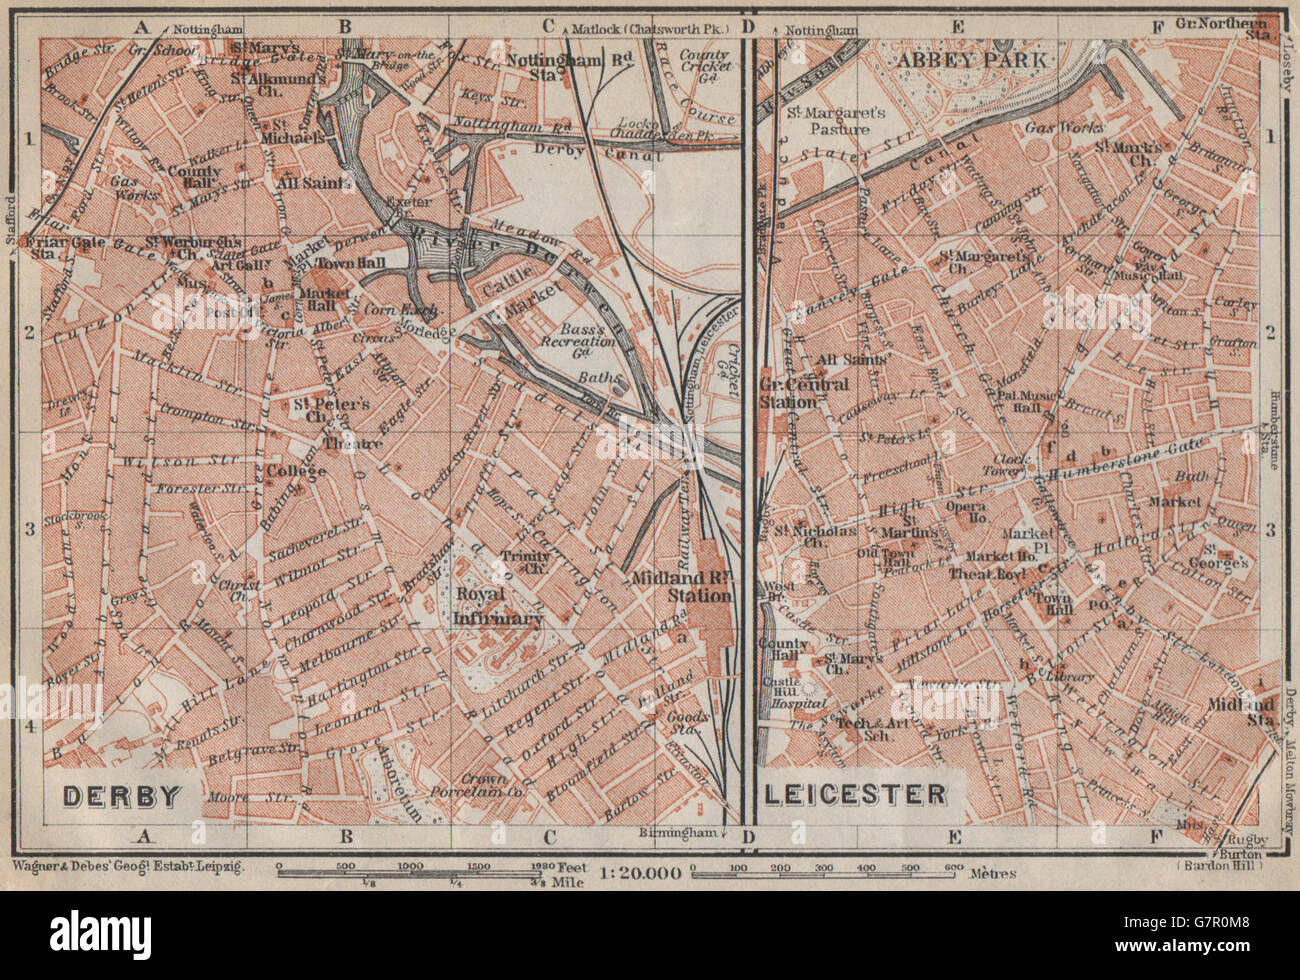 DERBY & LEICESTER antique town city plans. Midlands. BAEDEKER, 1910 old map Stock Photo